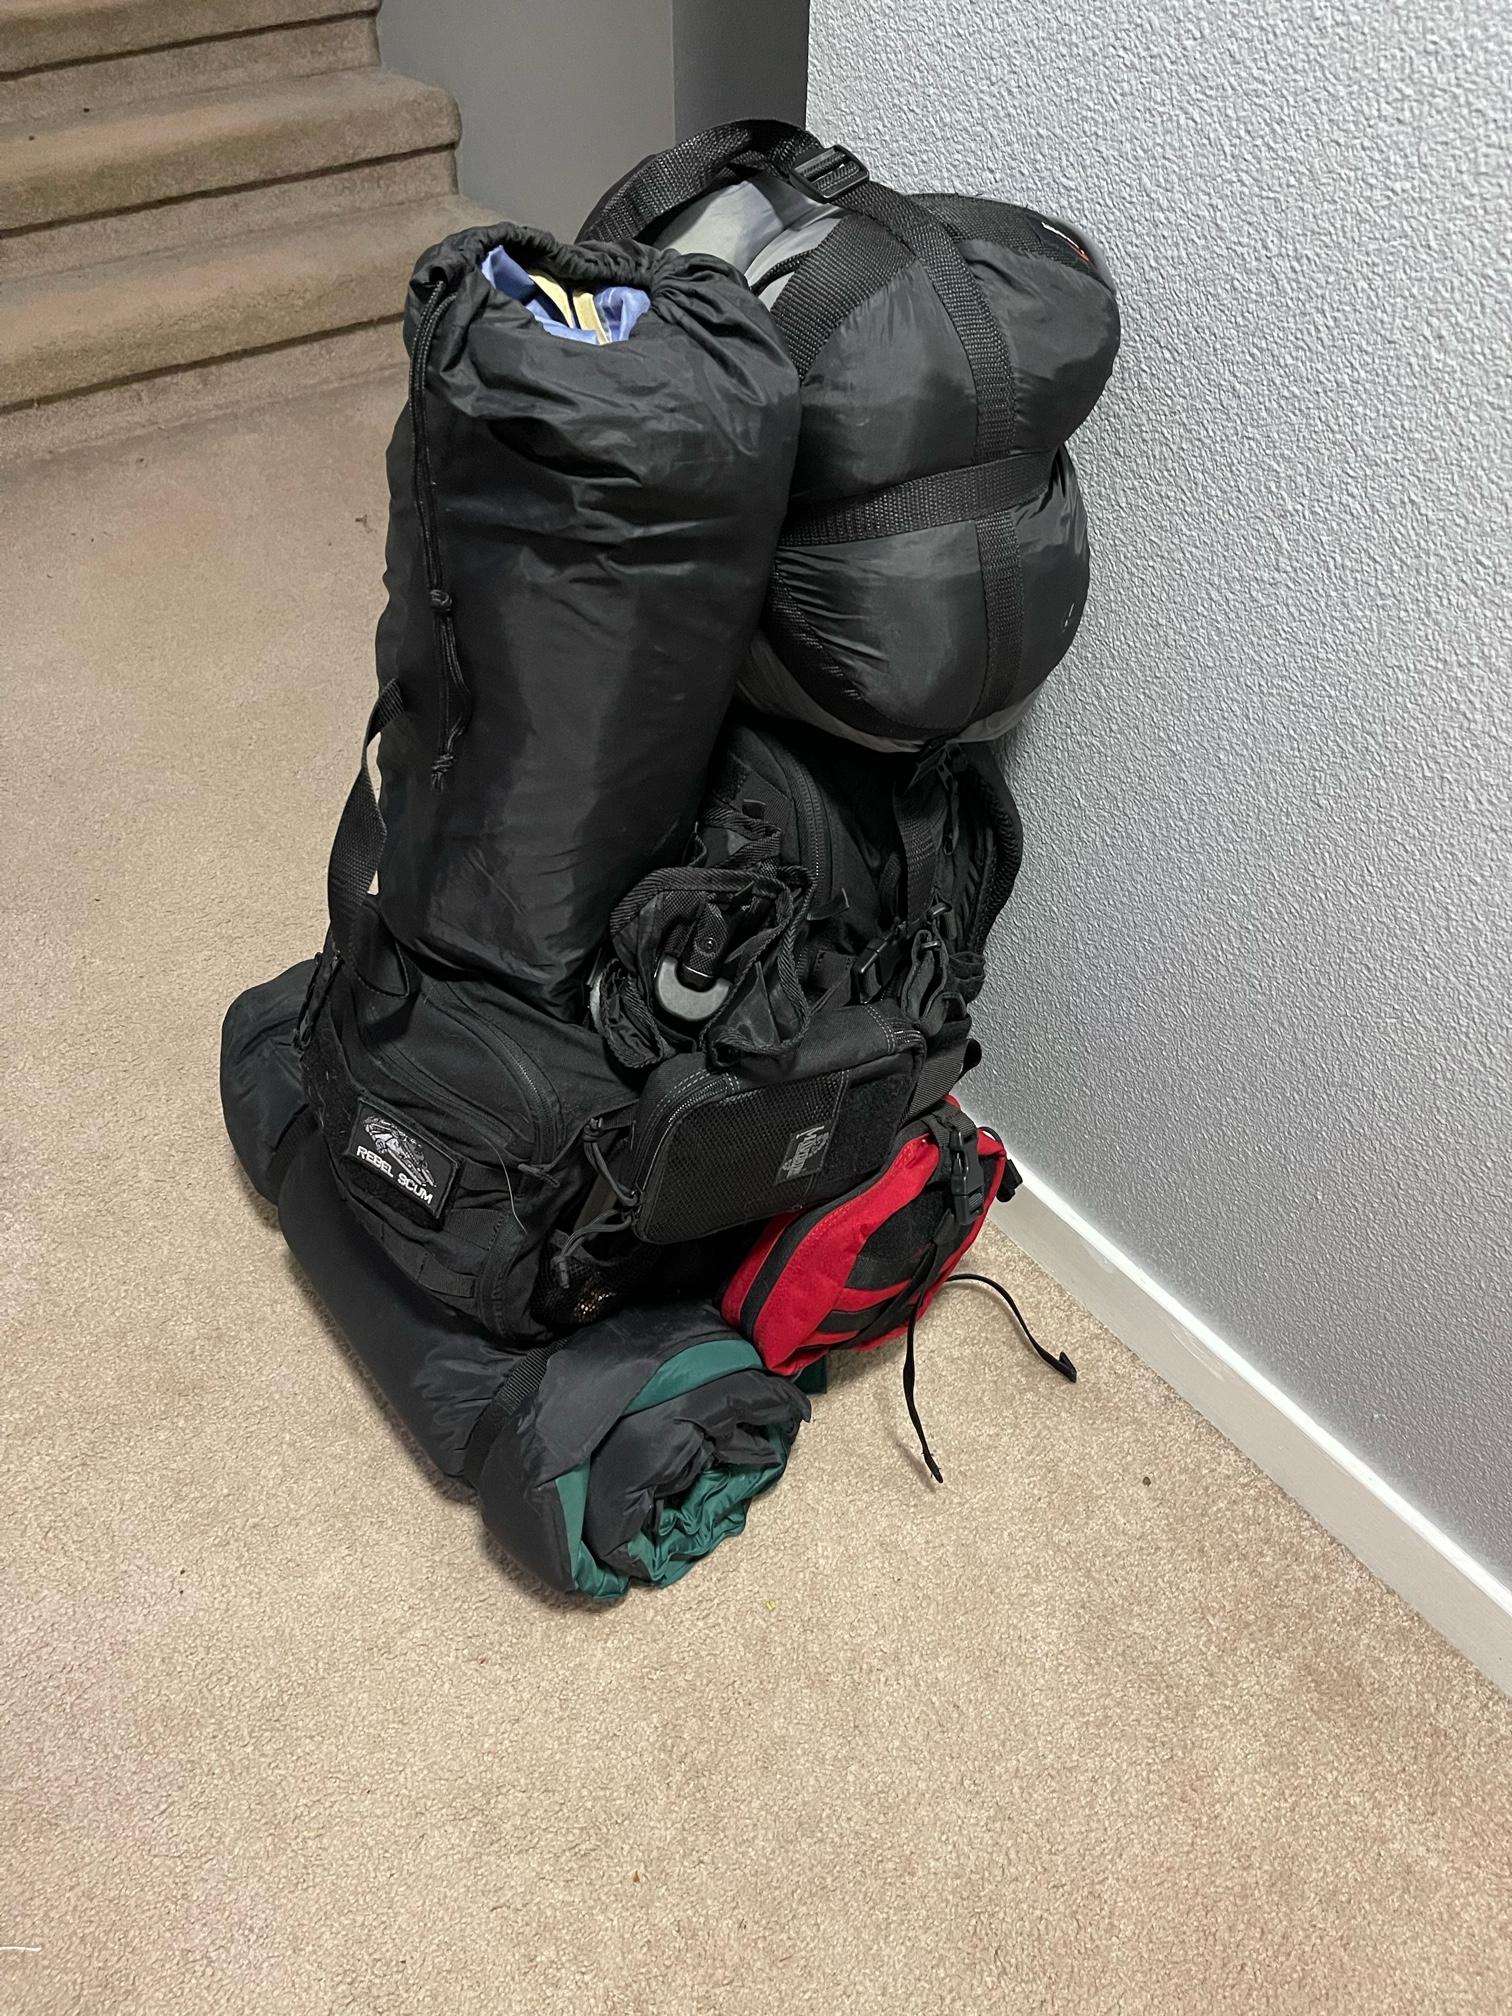 How to Pack an Overnight Bag